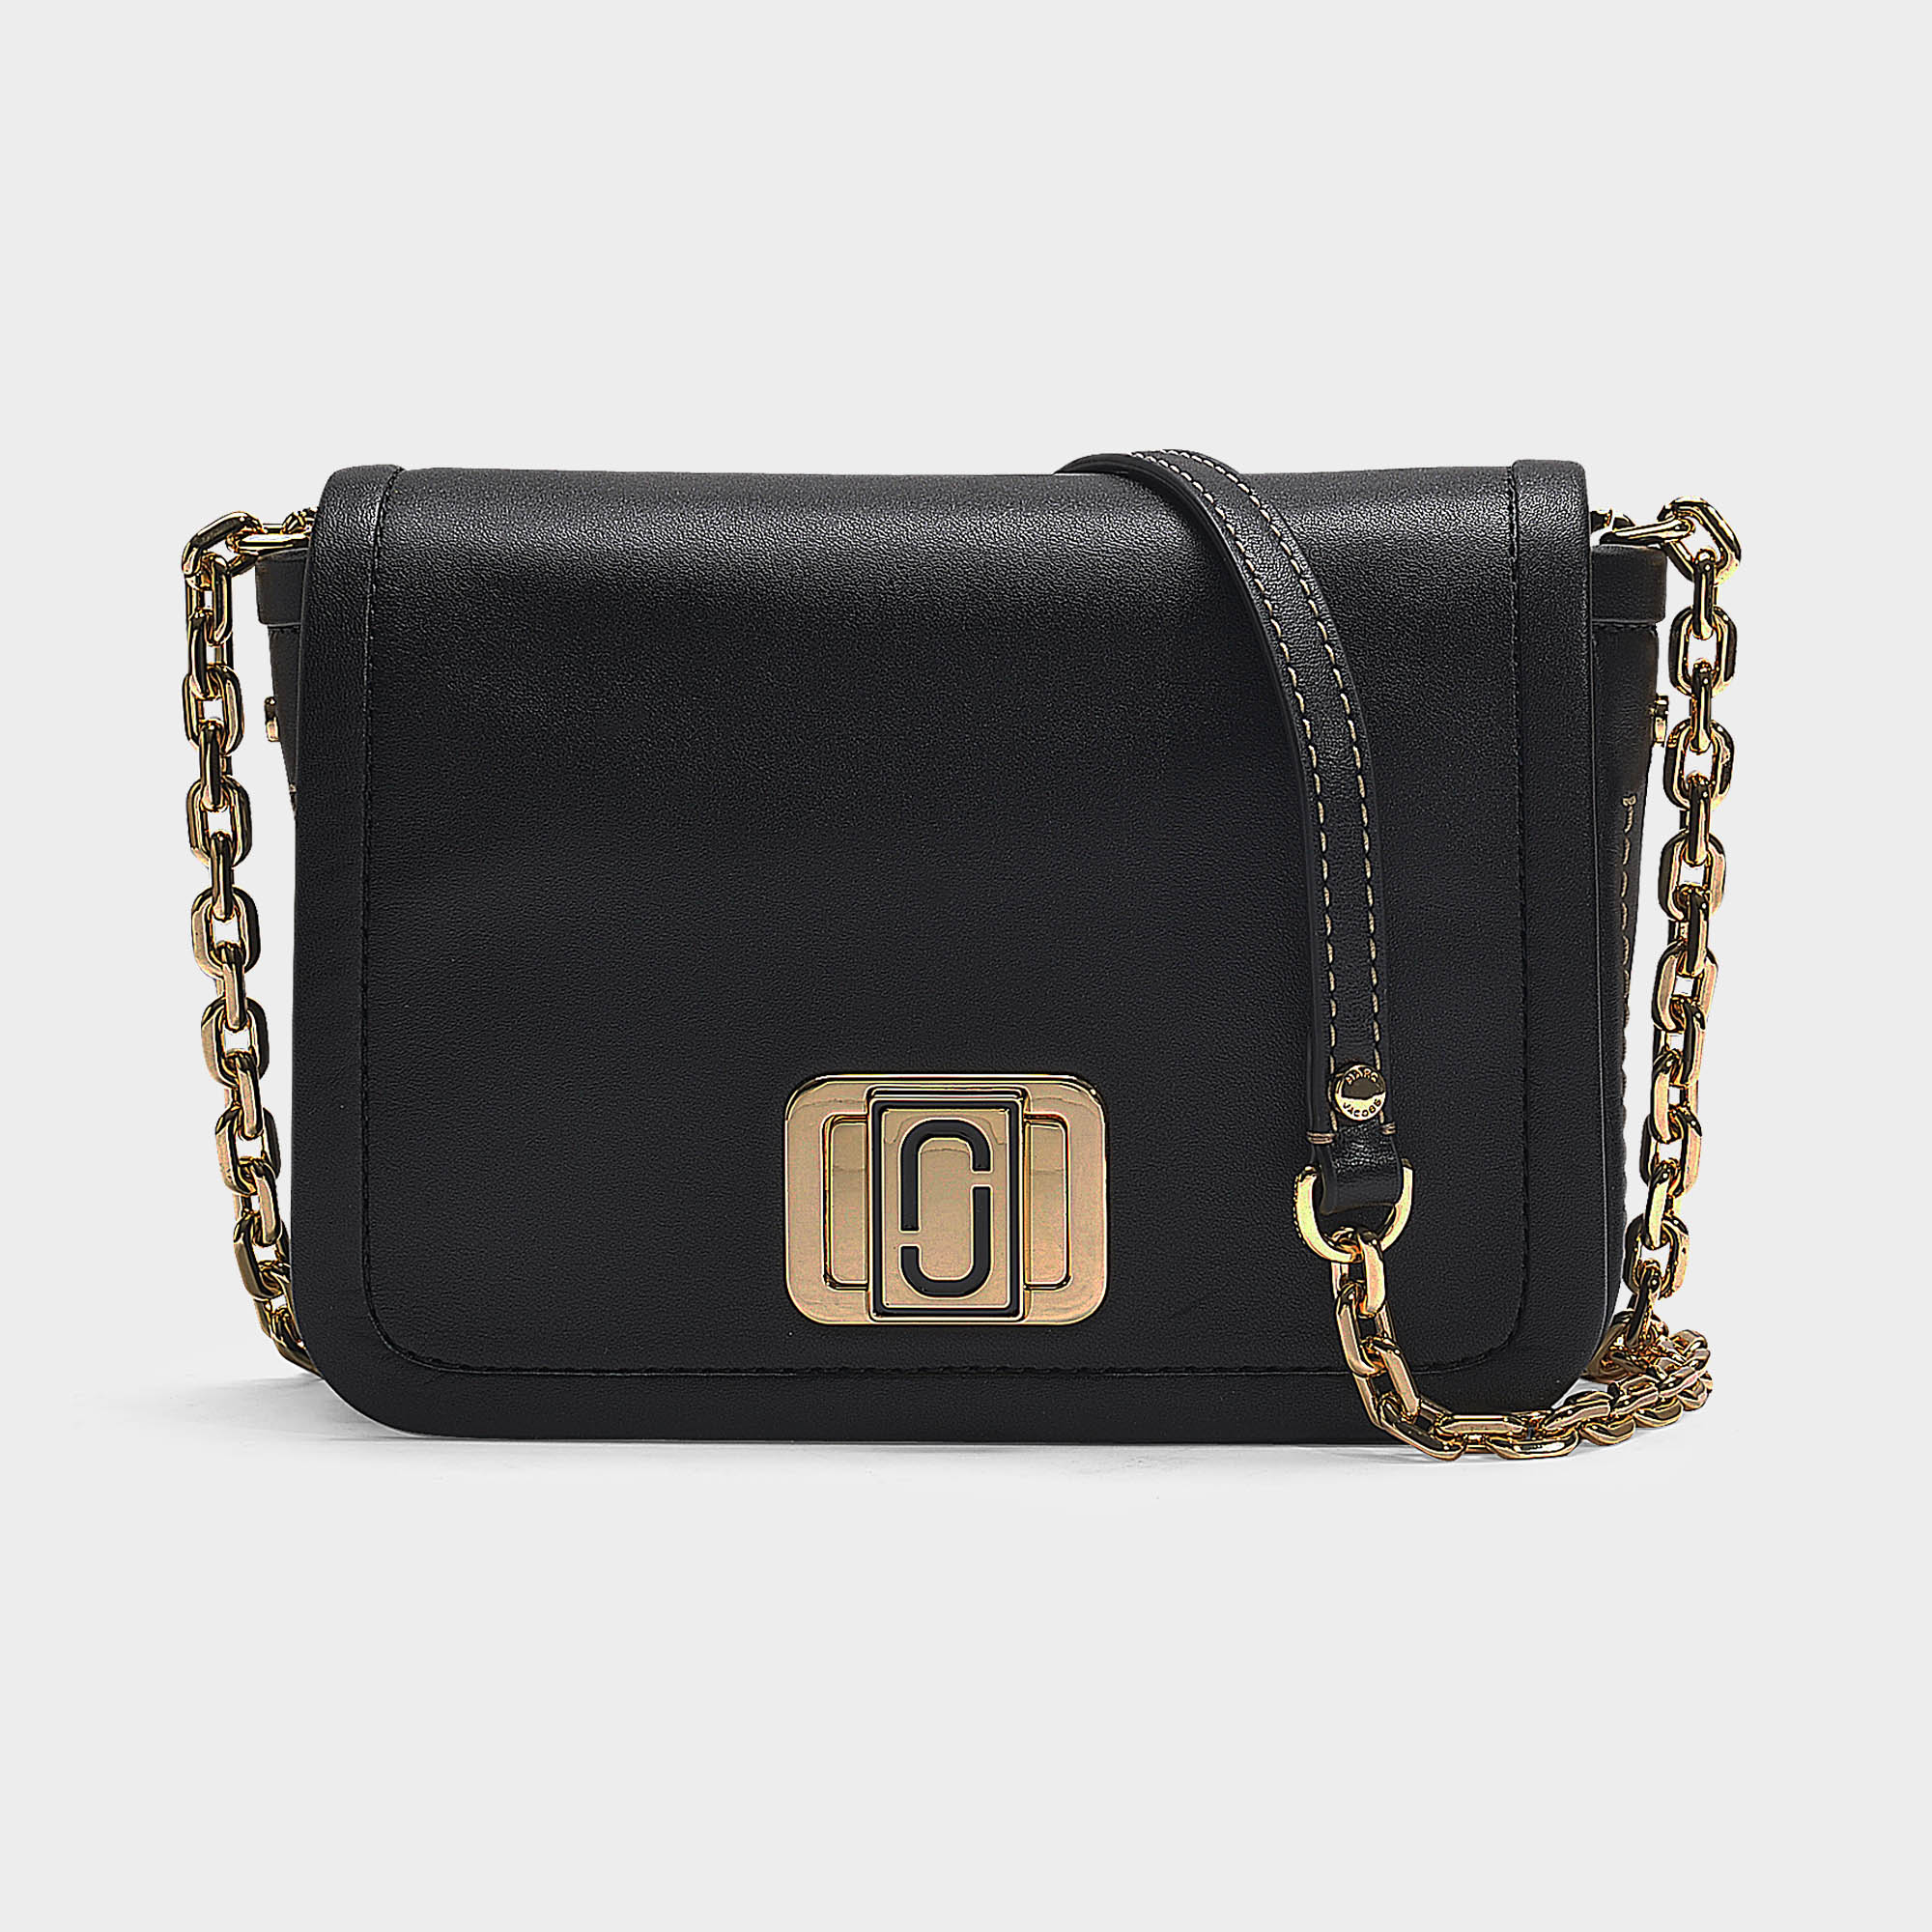 Marc Jacobs | The Mini Squeeze Bag With Chain In Black Calfskin | ModeSens